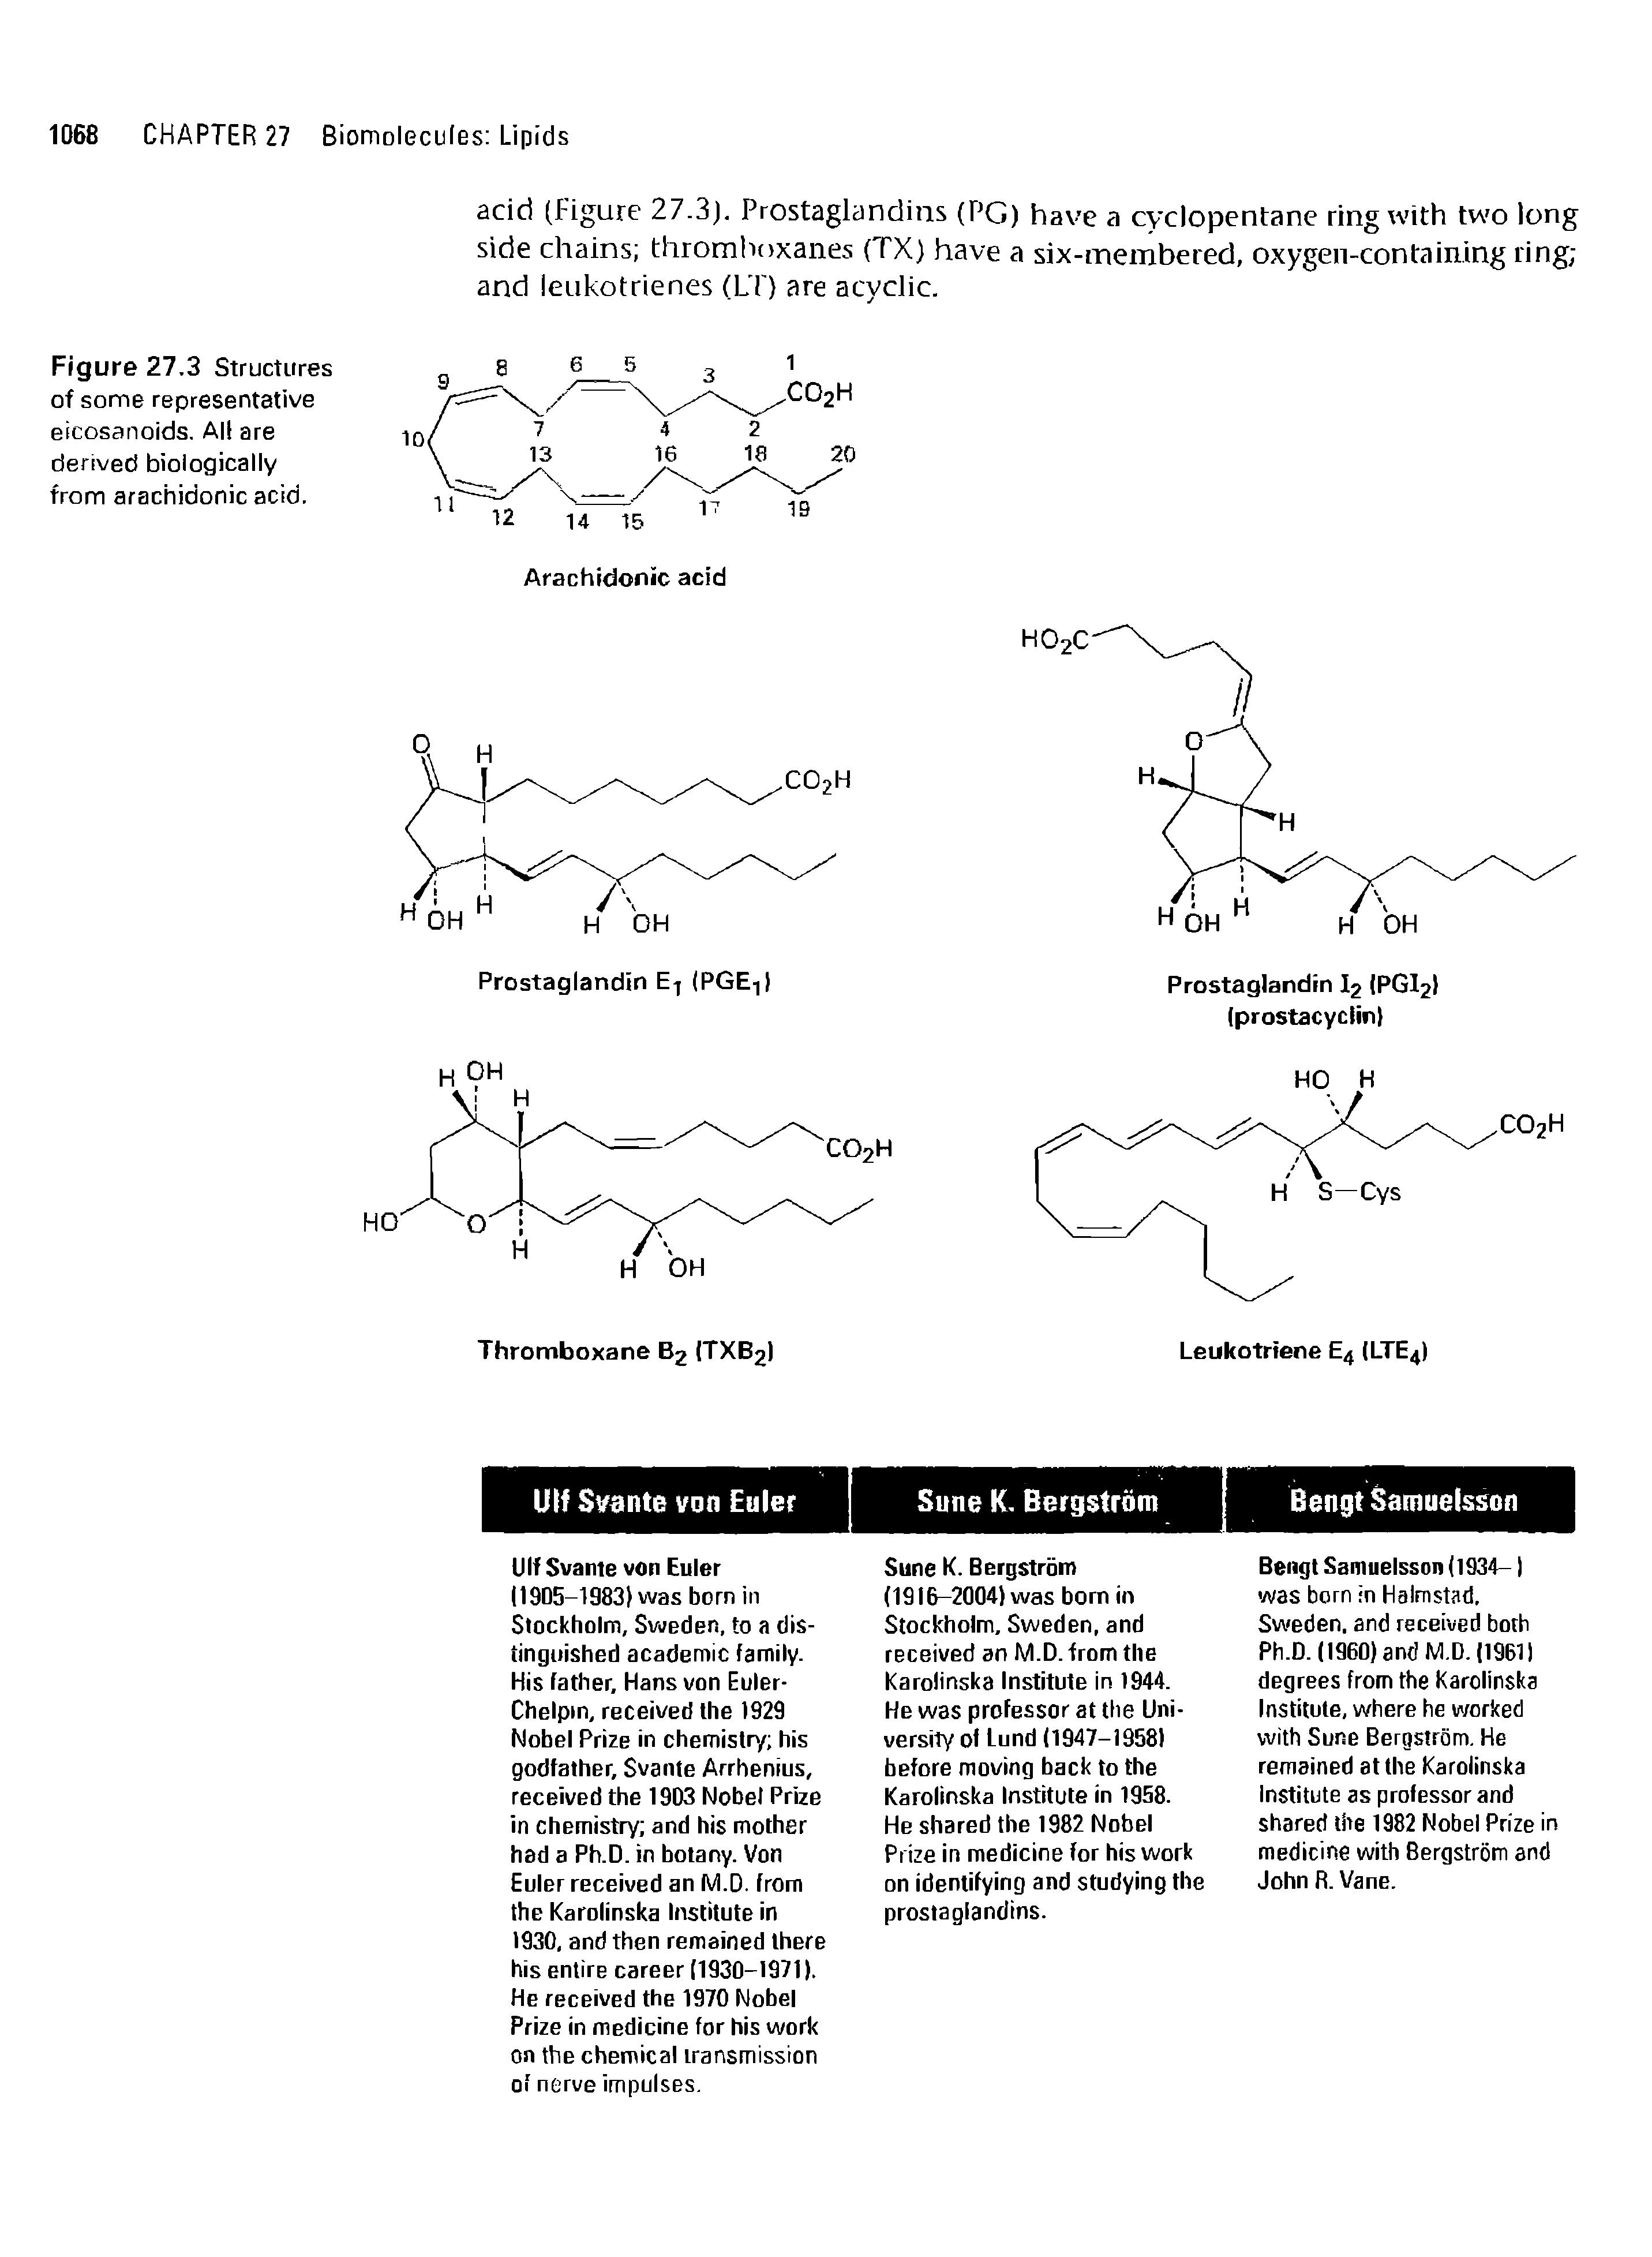 Figure 27.3 Structures of some representative eicosanoids. All are derived biologically from arachidonic acid.